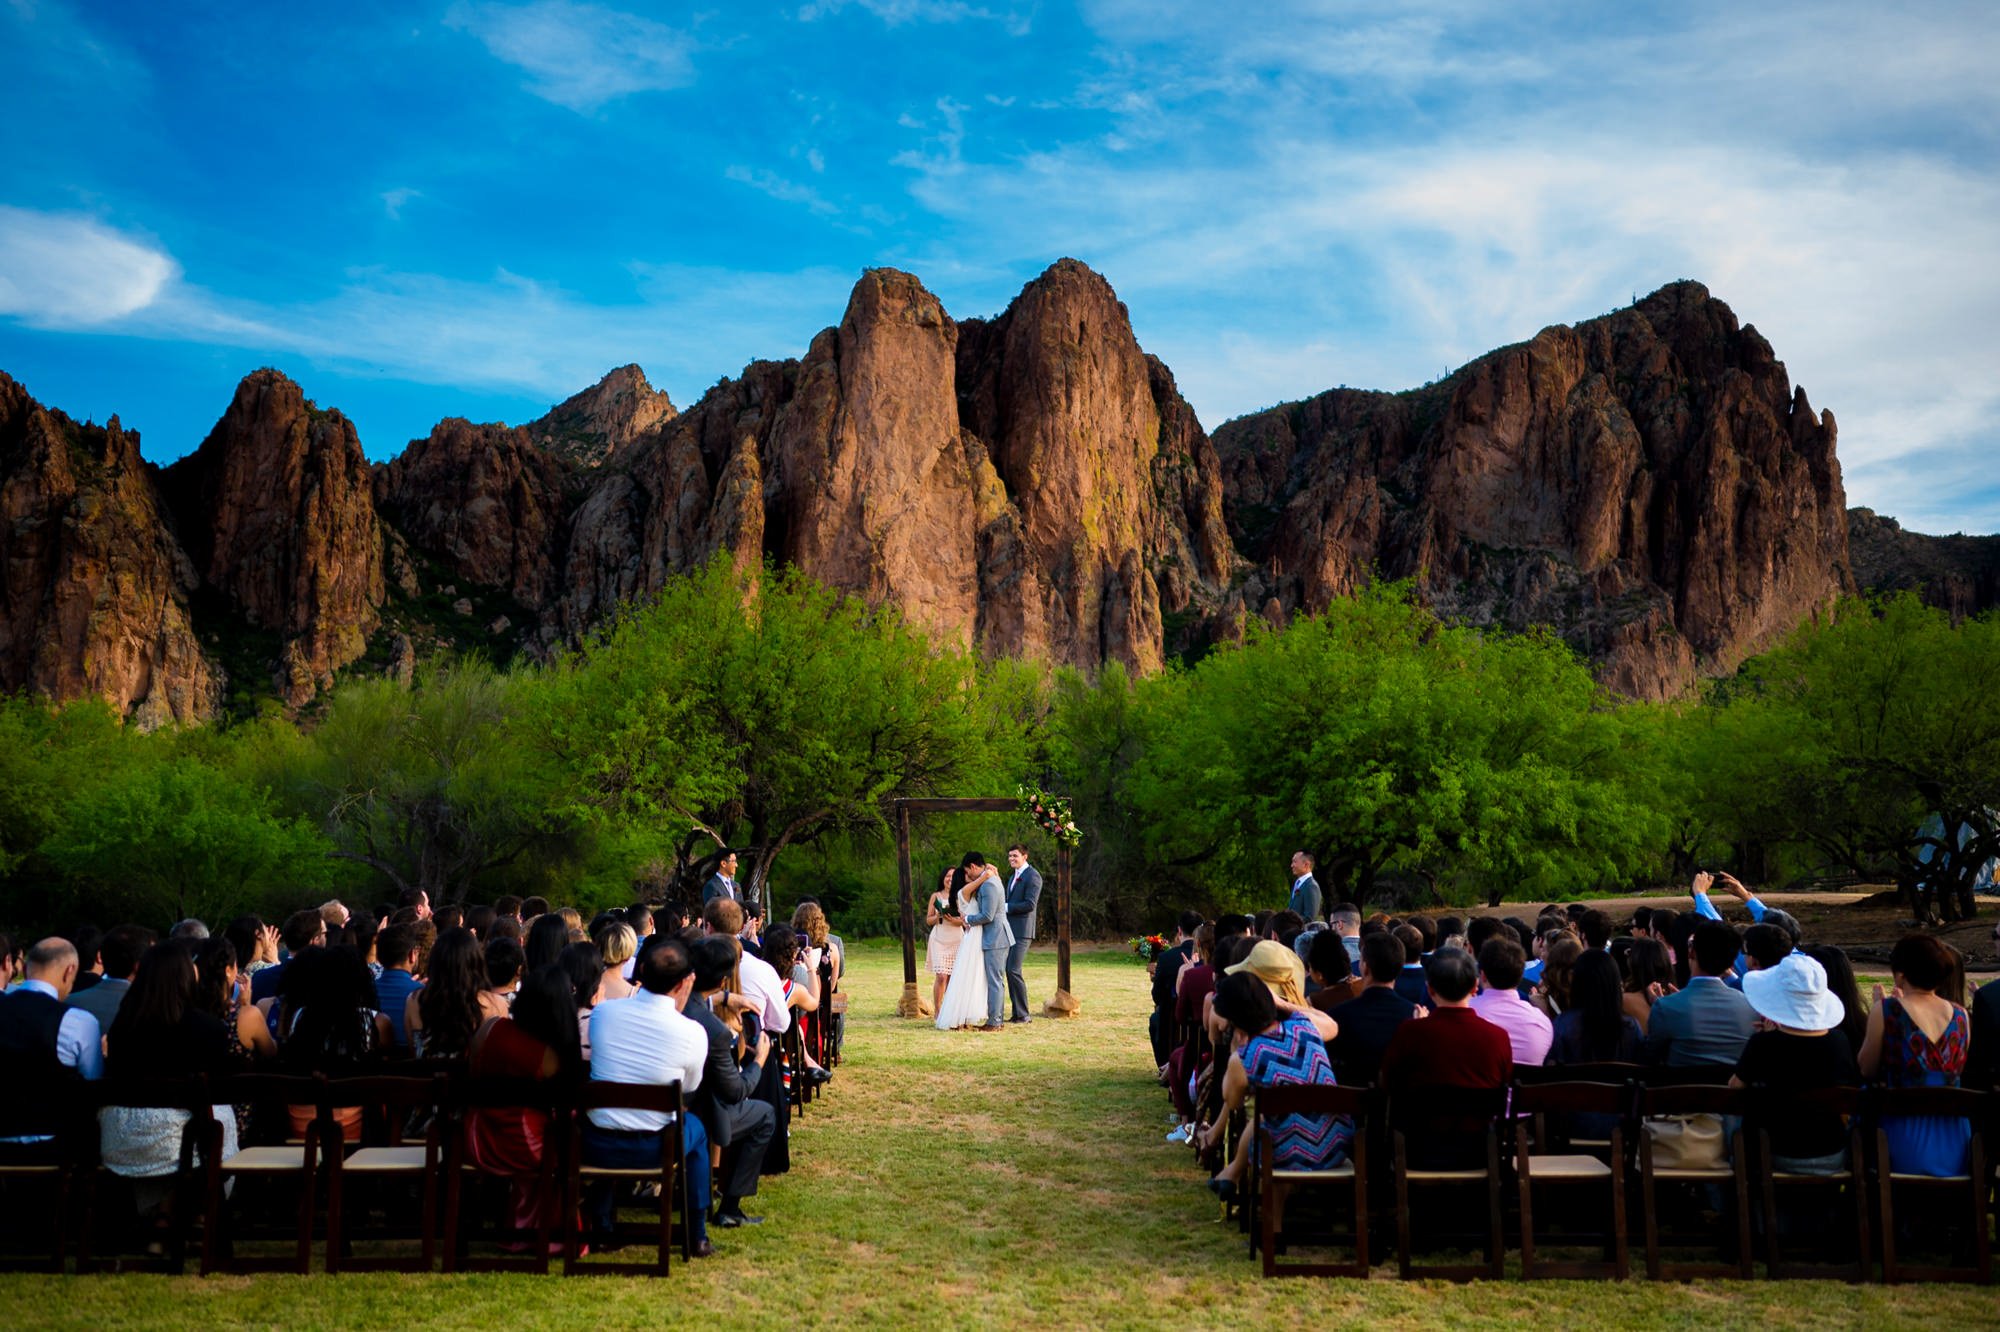 Saguaro Lake Guest Ranch The Perfect Location for a Laid-Back Fun-Filled Wedding. The best documentary wedding photographer Mantas Kubilinskas-98.jpg